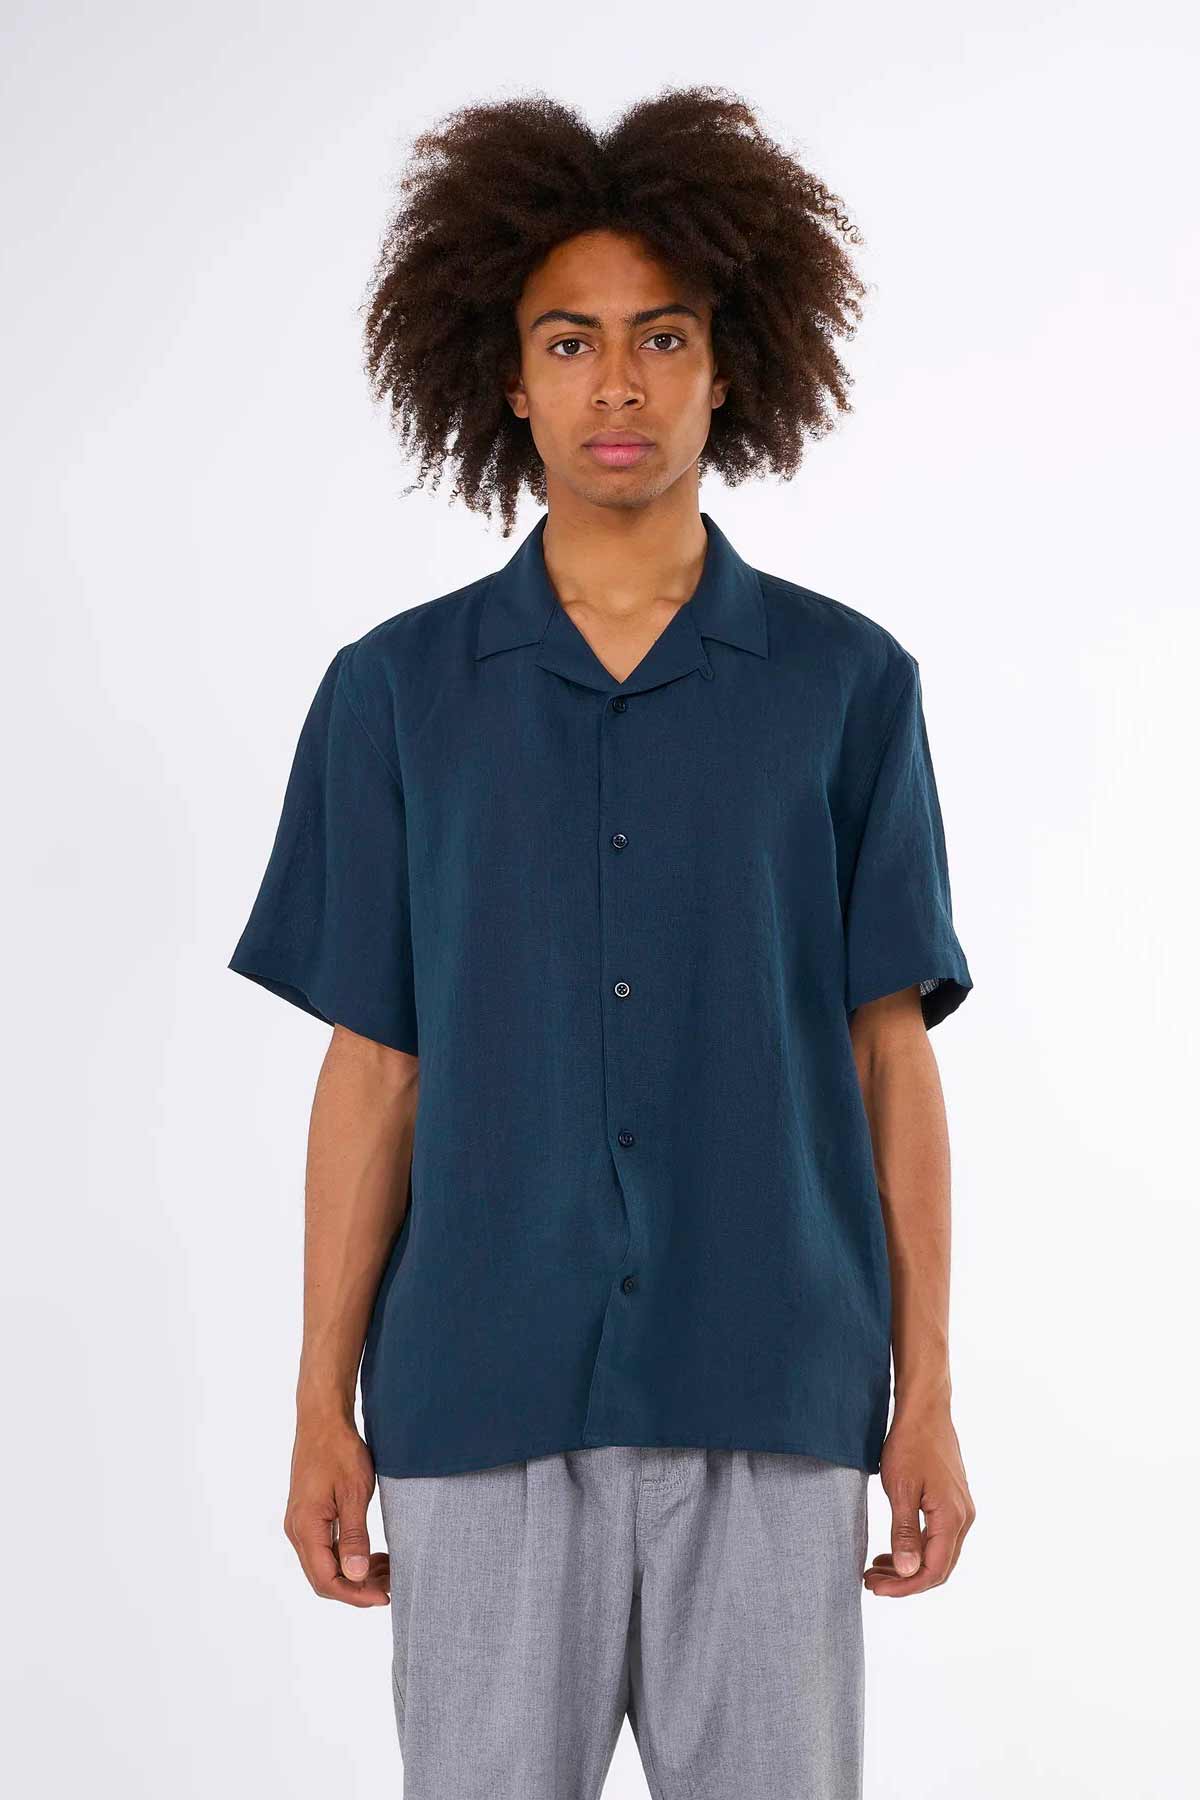 Chemise Box fit short sleeved linen - Knowledge Cotton Apparel